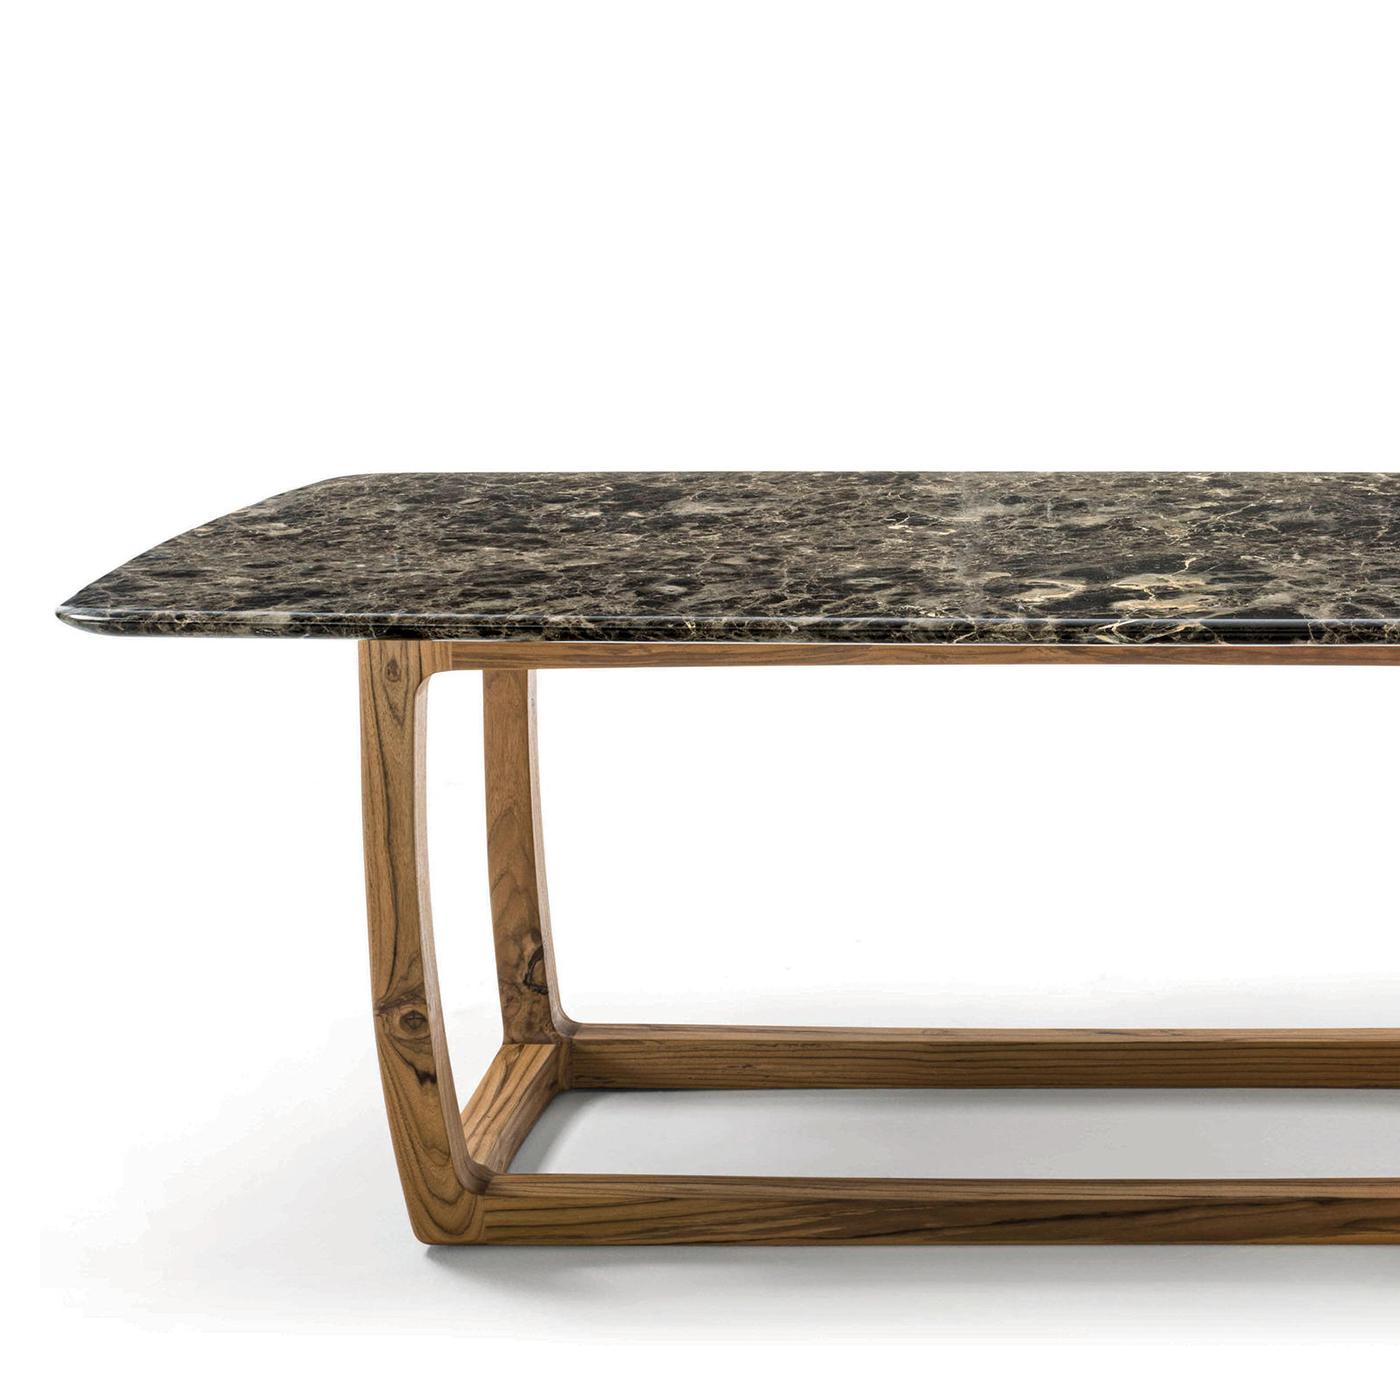 Table Trooper Outdoor or Indoor with structure in
solid natural teak, with brown emperador polished 
marble top. Wood treated with natural pine extracts.
Also available in Trooper center table or in coffee table.
Chairs not included, available